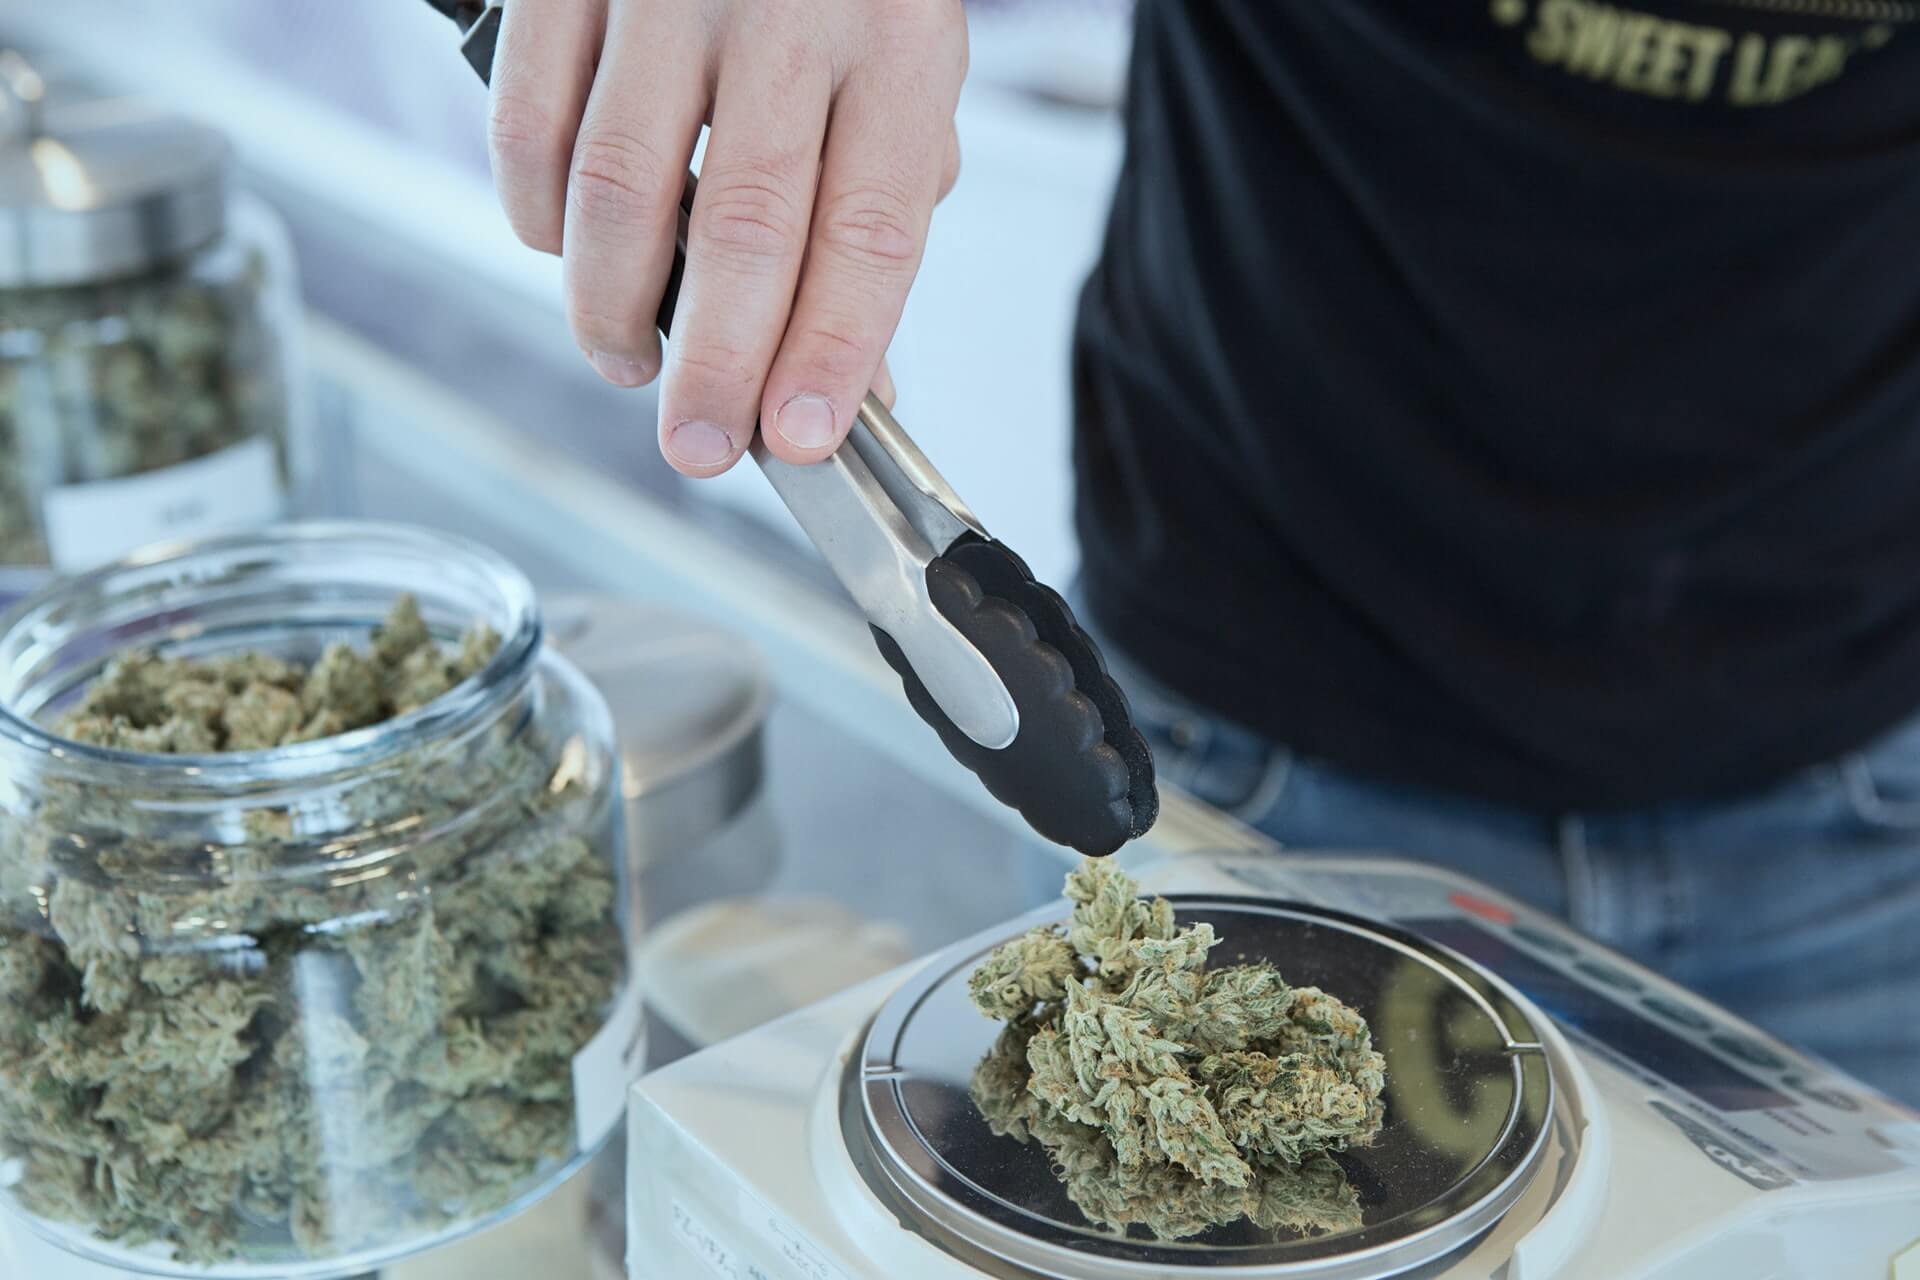 Develop standard operating procedures and steps to opening a dispensary